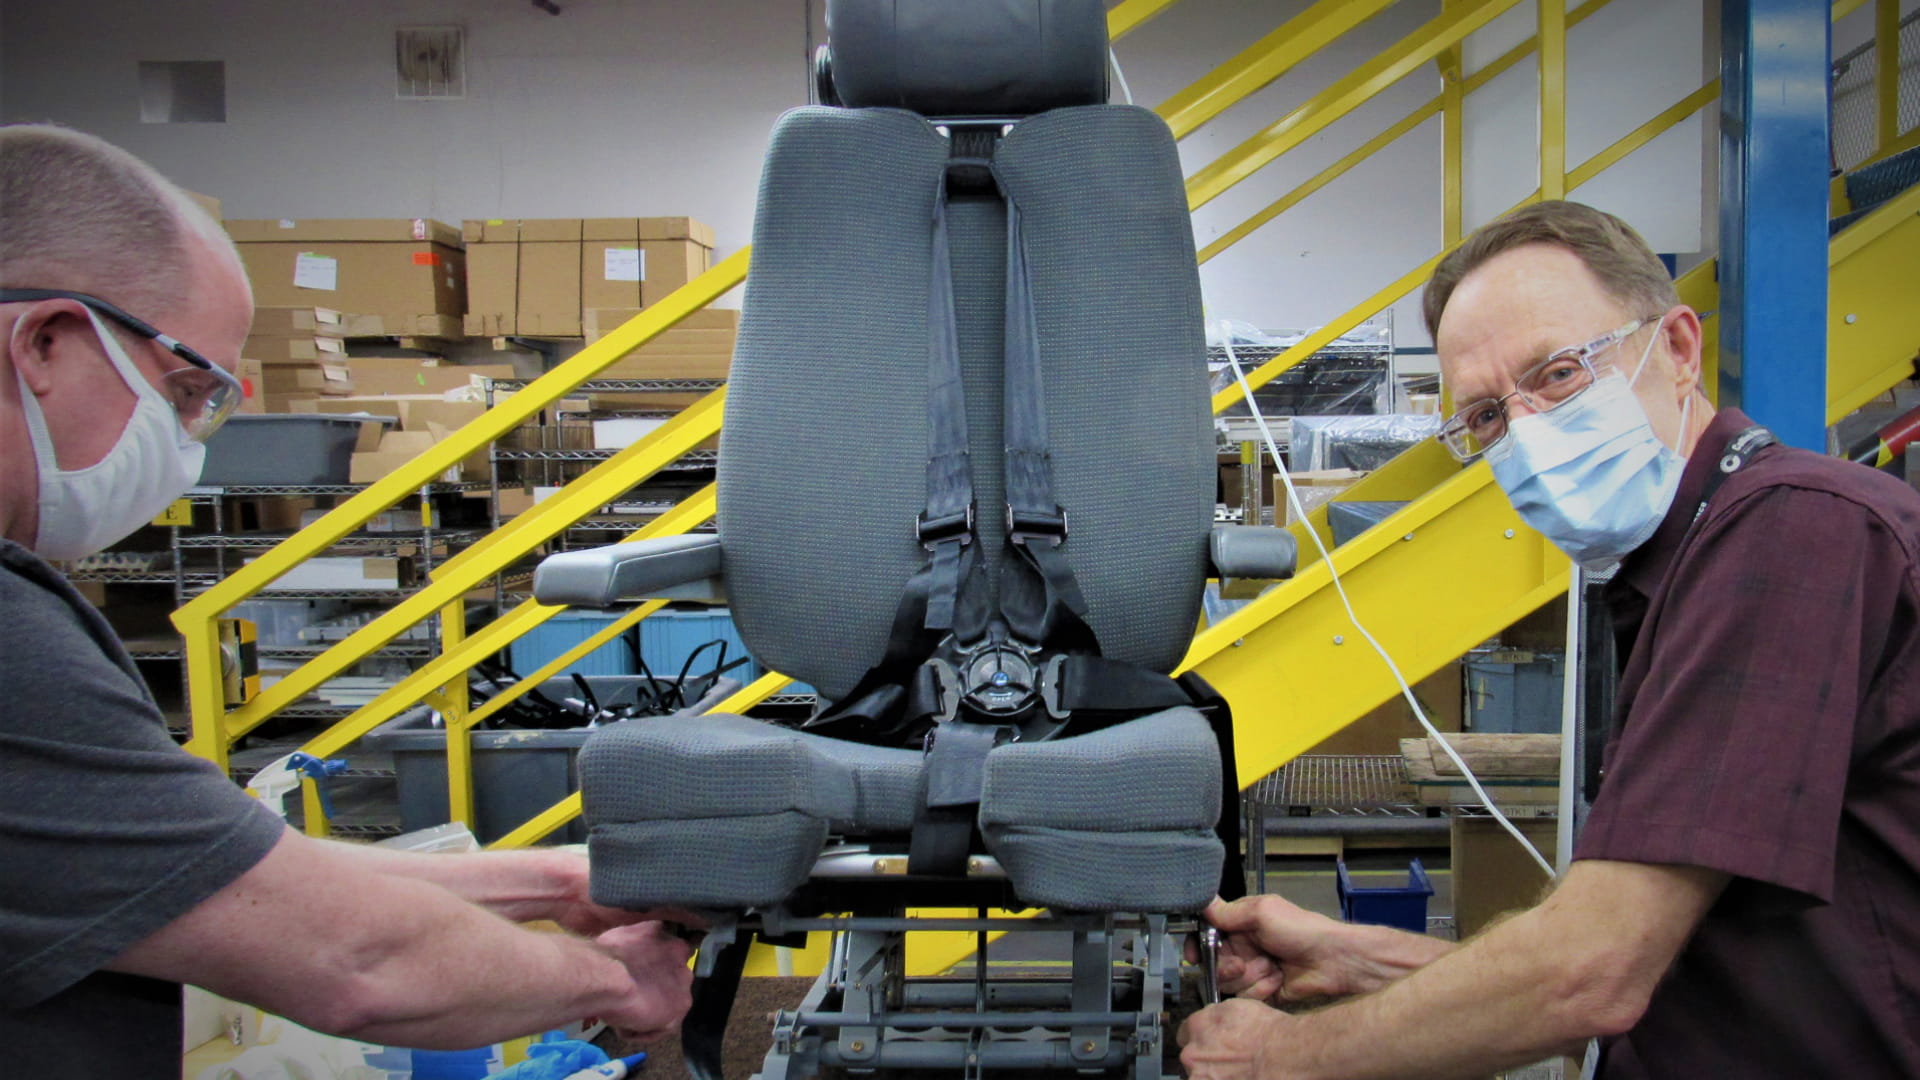 Design engineer, Shawn Day (left) stops to smile while working with Mike Furlong on a pilot seat in the prototyping shop in Colorado Springs, CO.